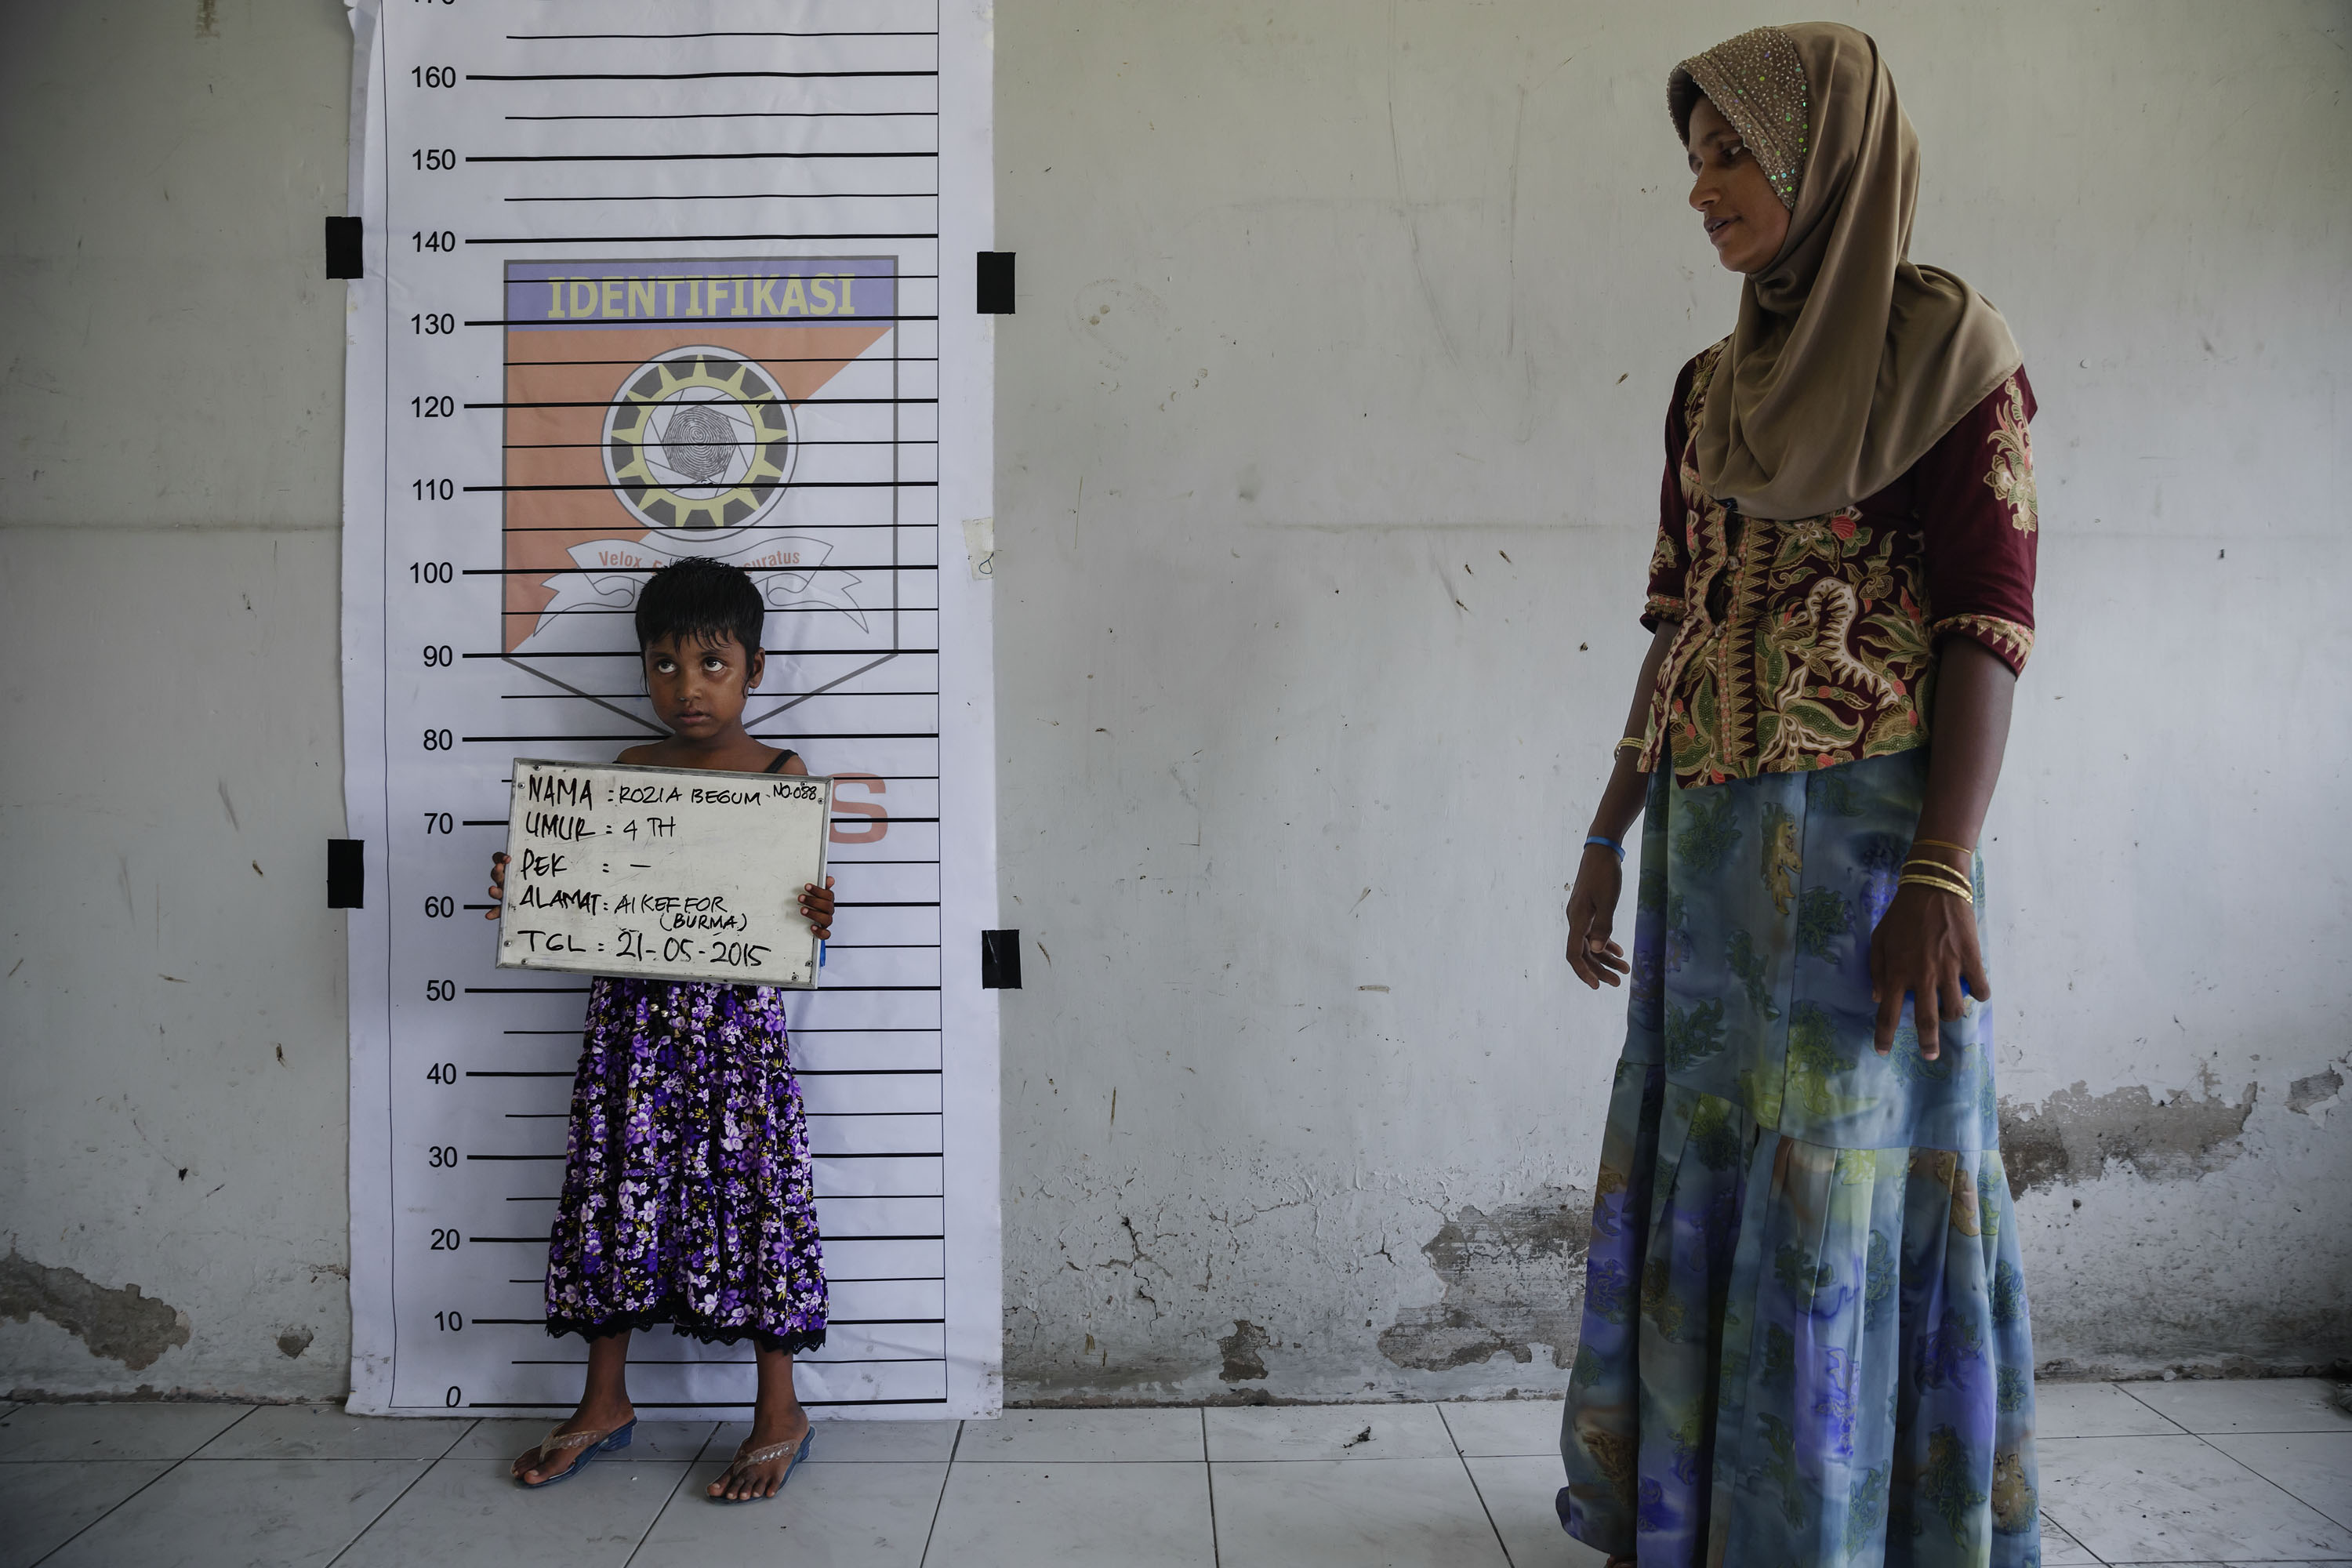 A Rohingya child is registered at a temporary shelter in Indonesia in May. (James Nachtwey for TIME)